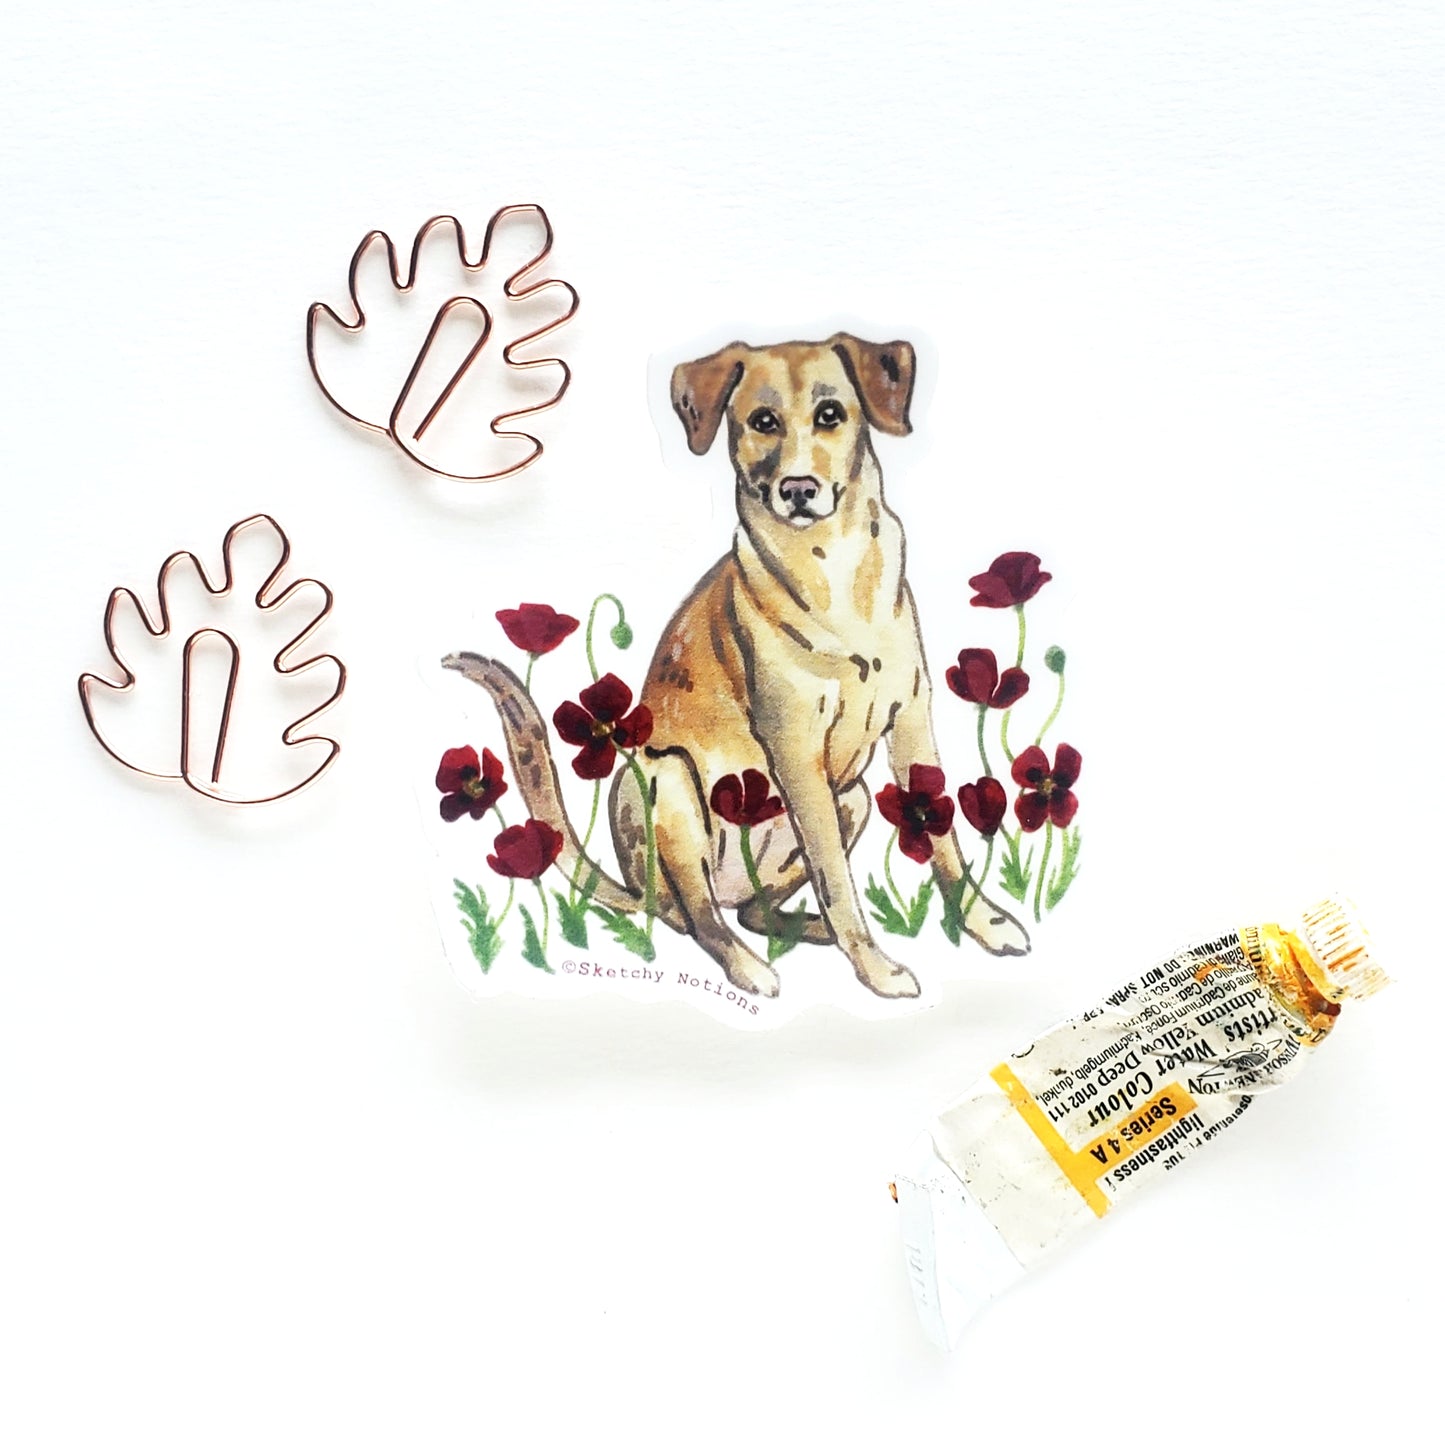 Tiny Dog and Flower Sticker 1 - Golden Lab with Red Poppies